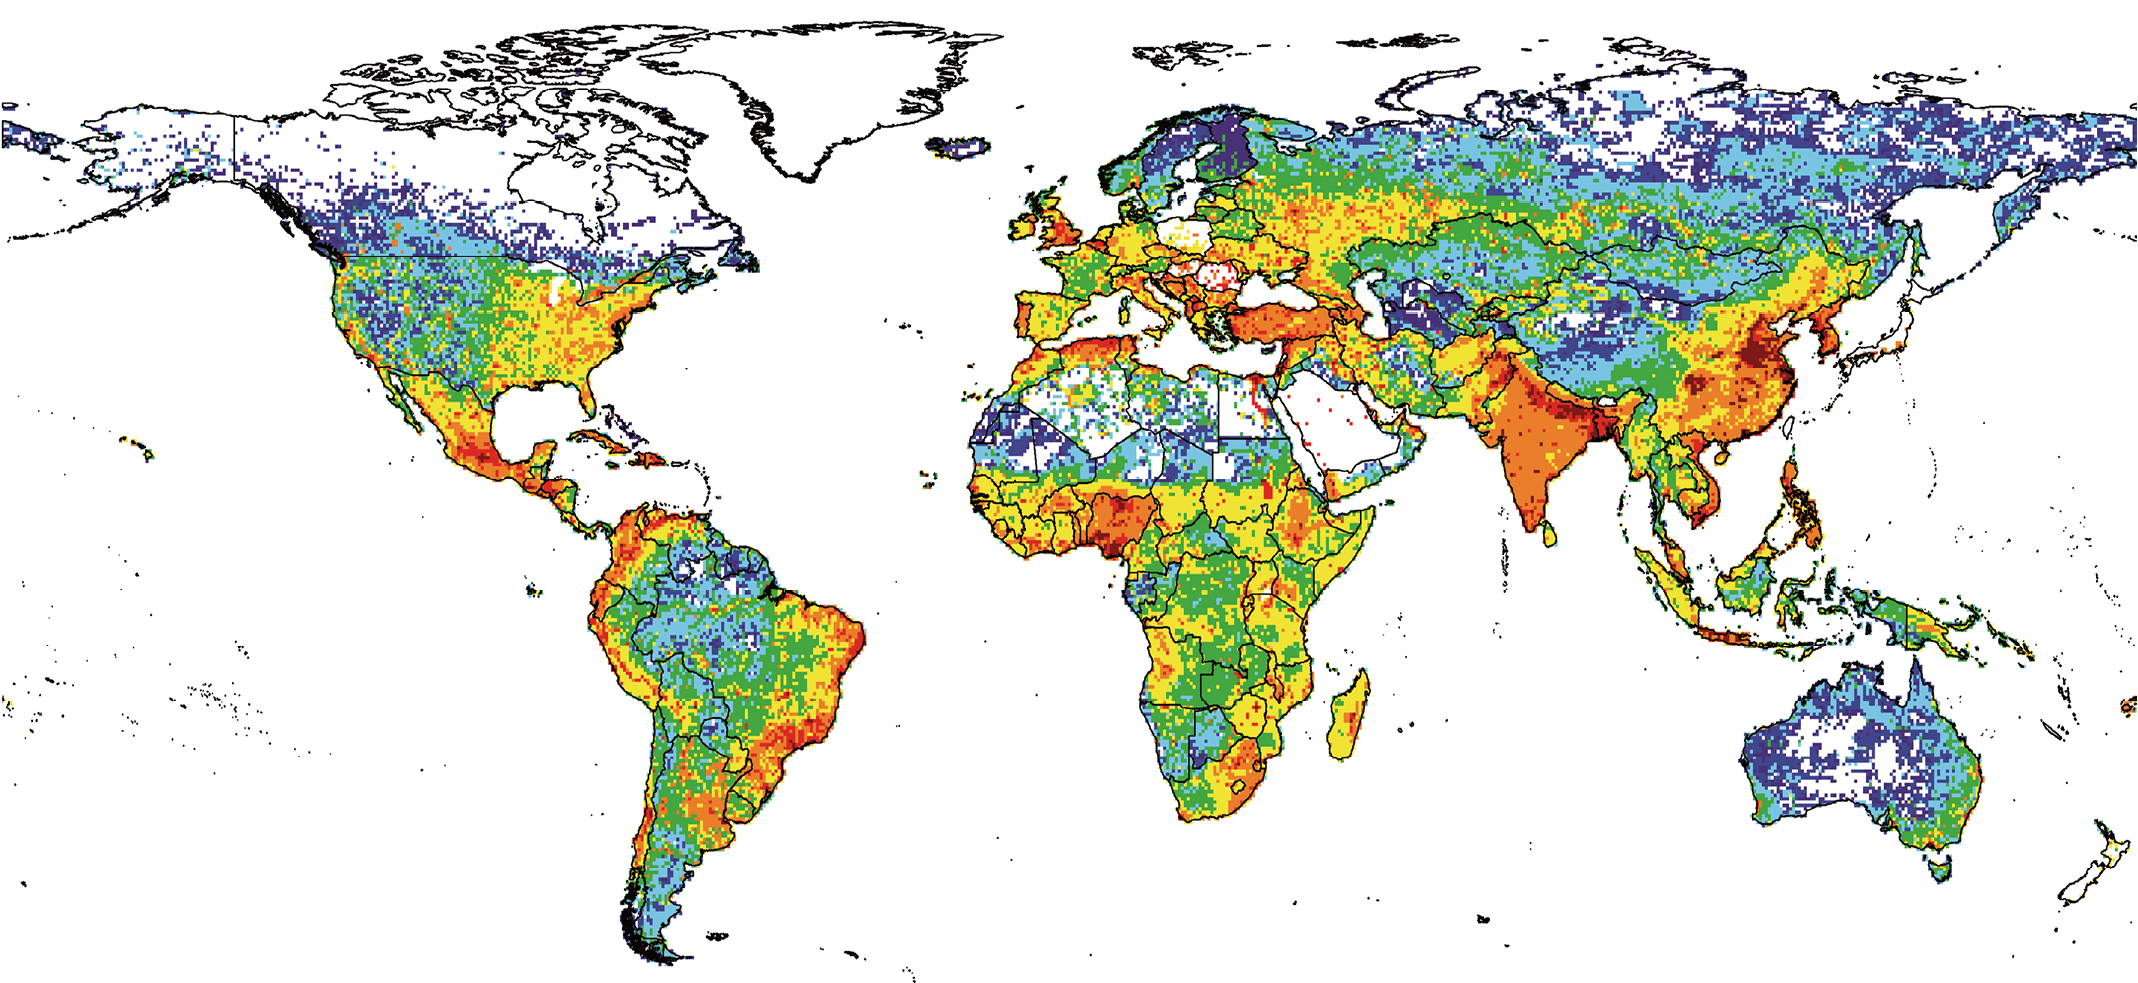 Mapping by Kiulia illustrates total rotavirus emissions in viral particles, produced worldwide by the urban population during 2010. Based on the systems modeling approach, maps and data supplied to communities can be used to discuss decisions on risk mitigation and wastewater treatment.